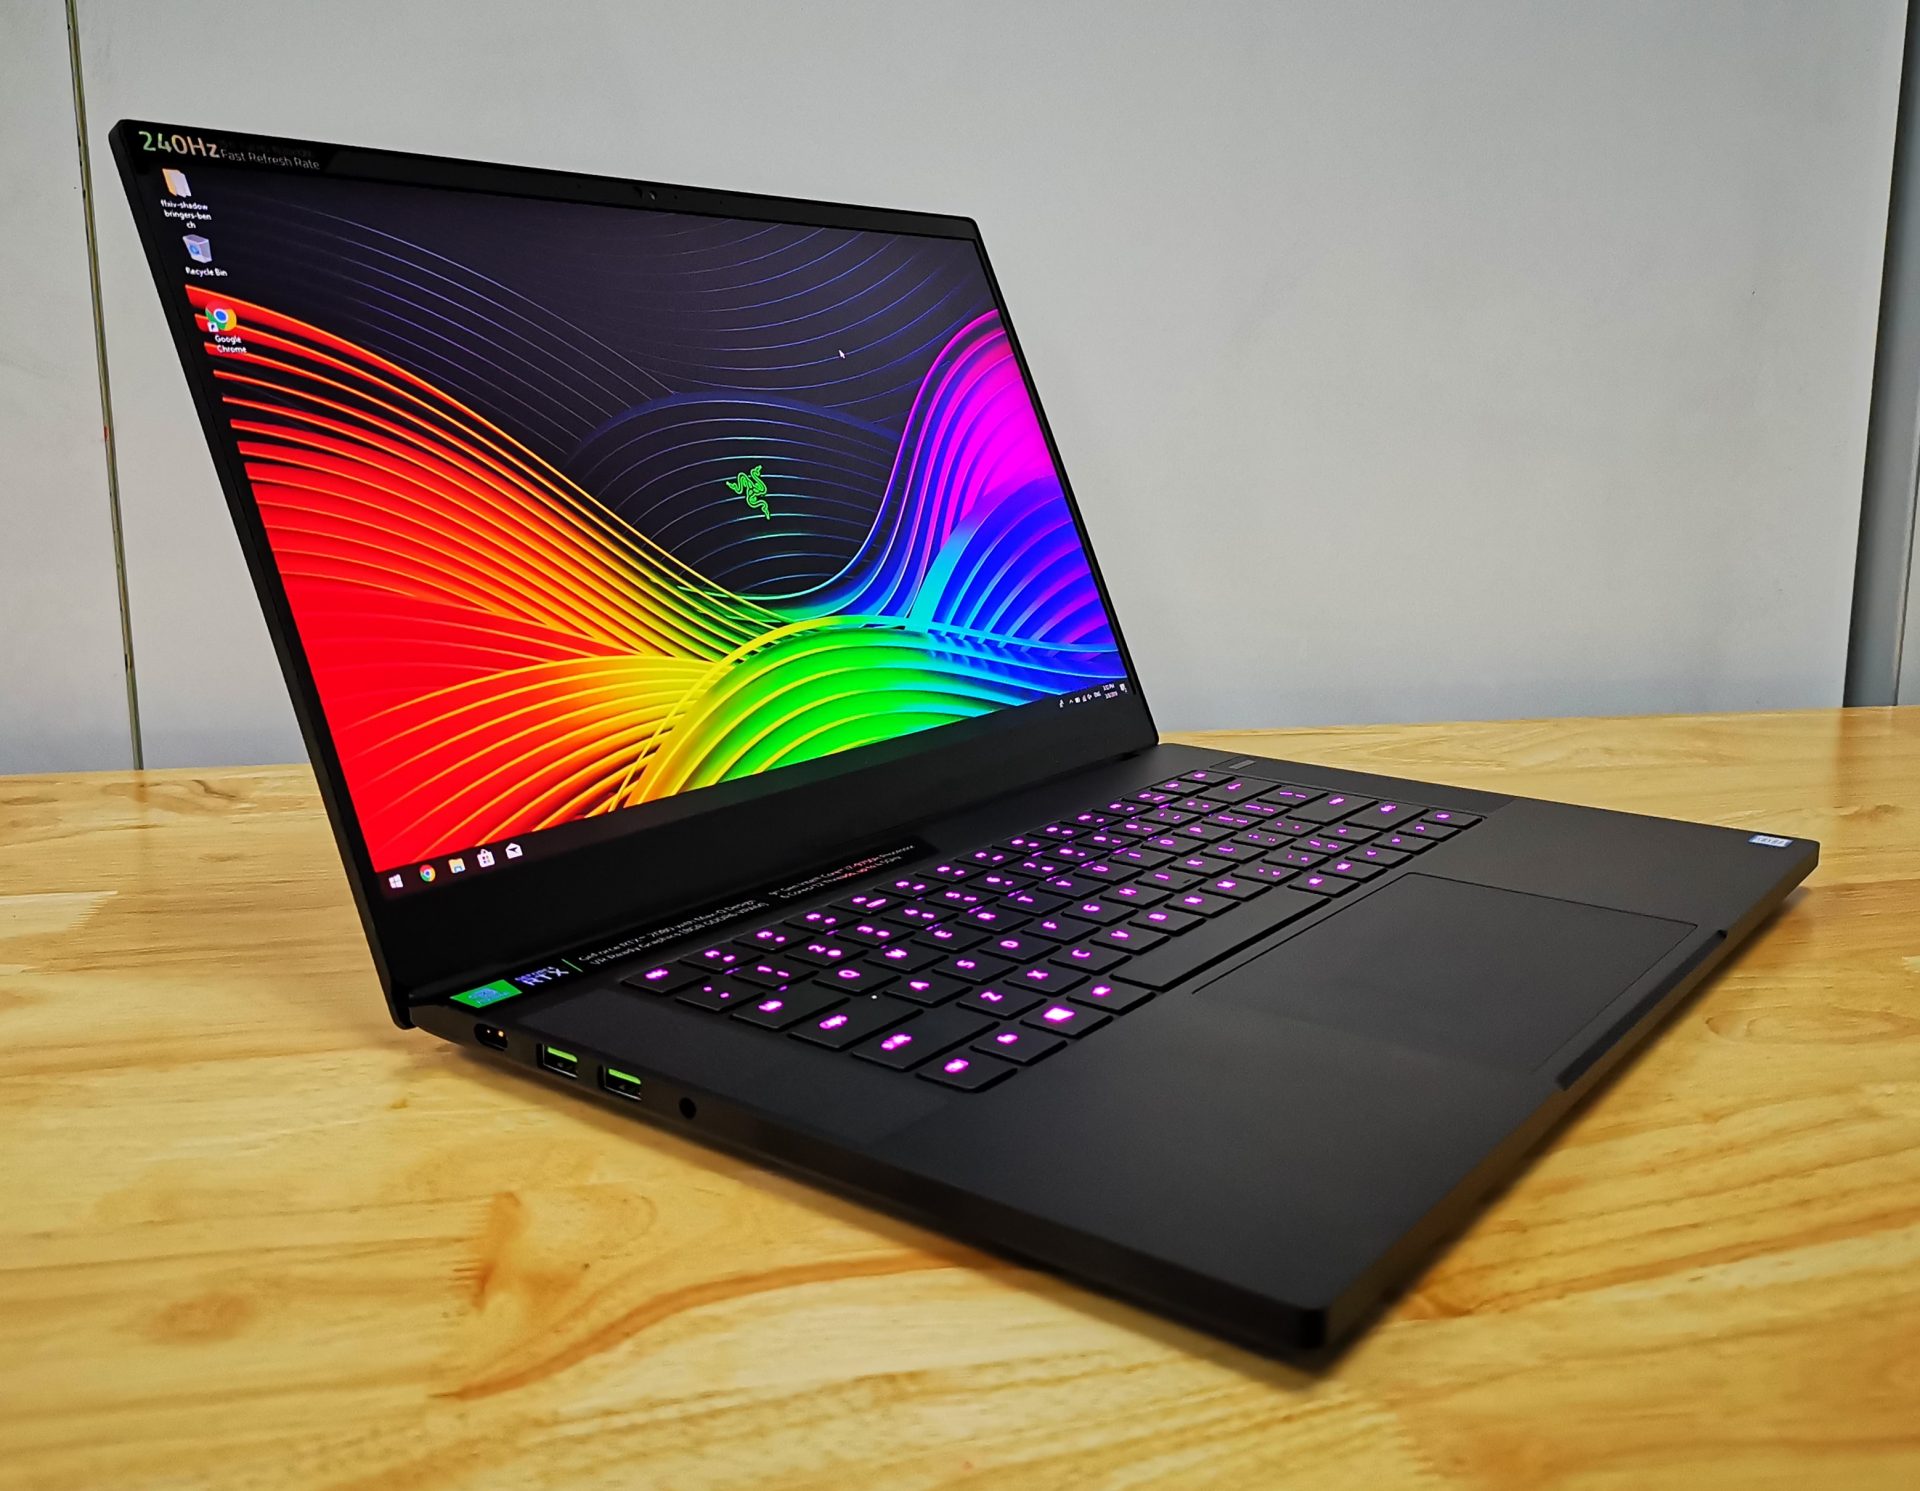  Razer  Blade 15 Advanced Model Gaming Laptop  Review The 